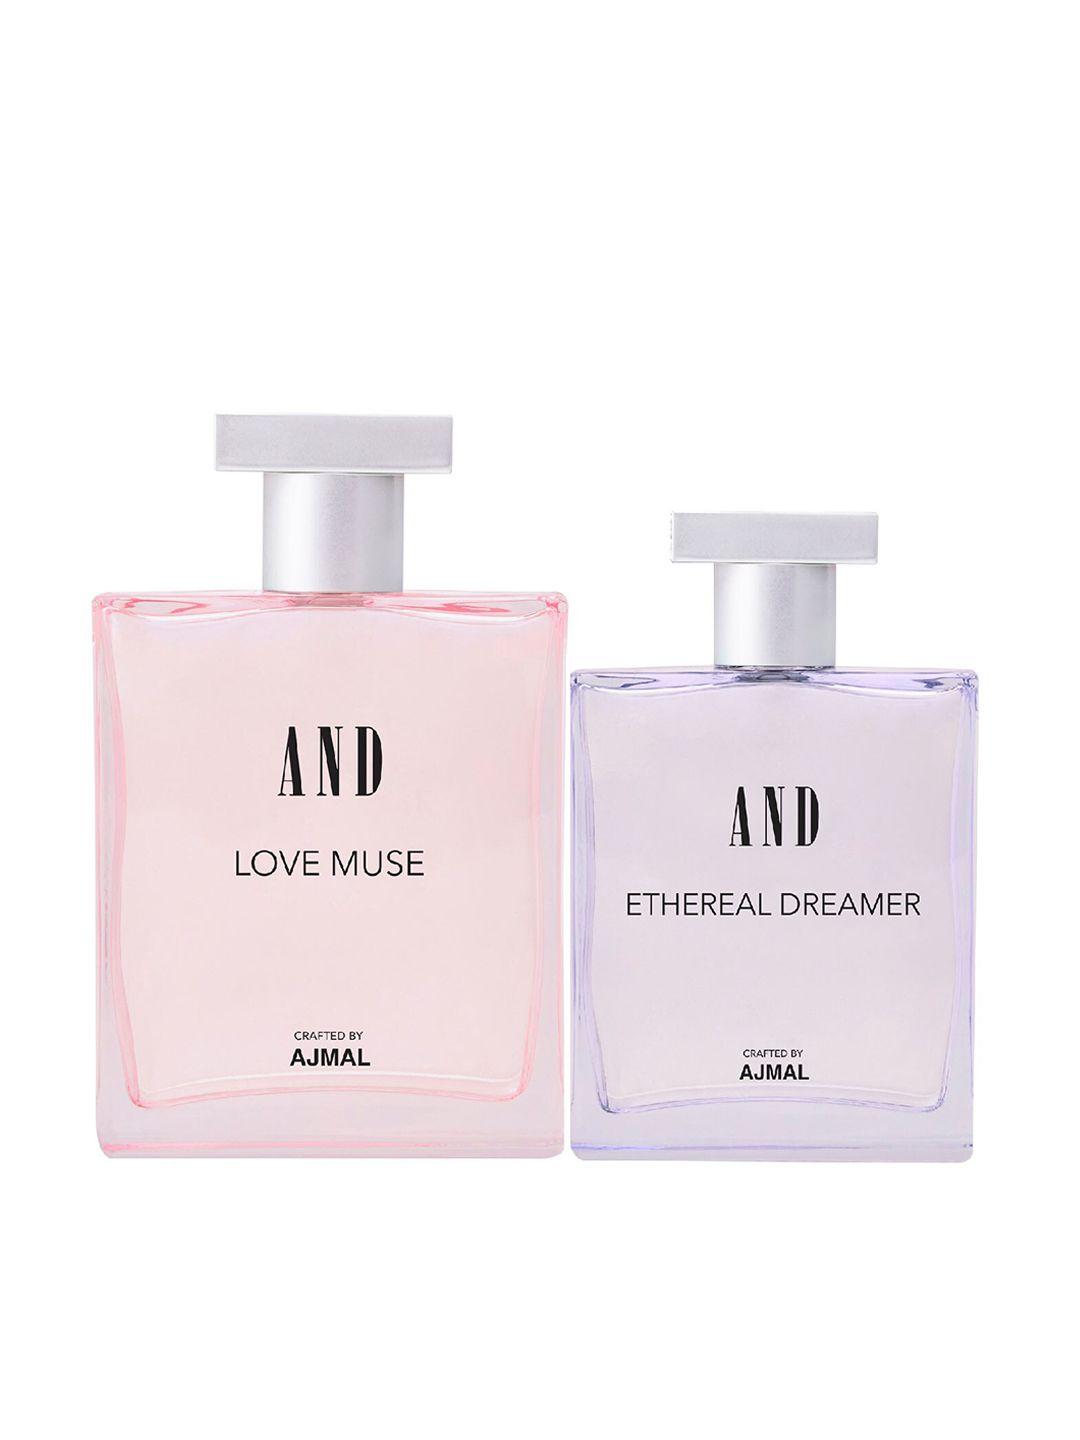 and pack of 2 love muse edp & ethereal dreamer edp perfume